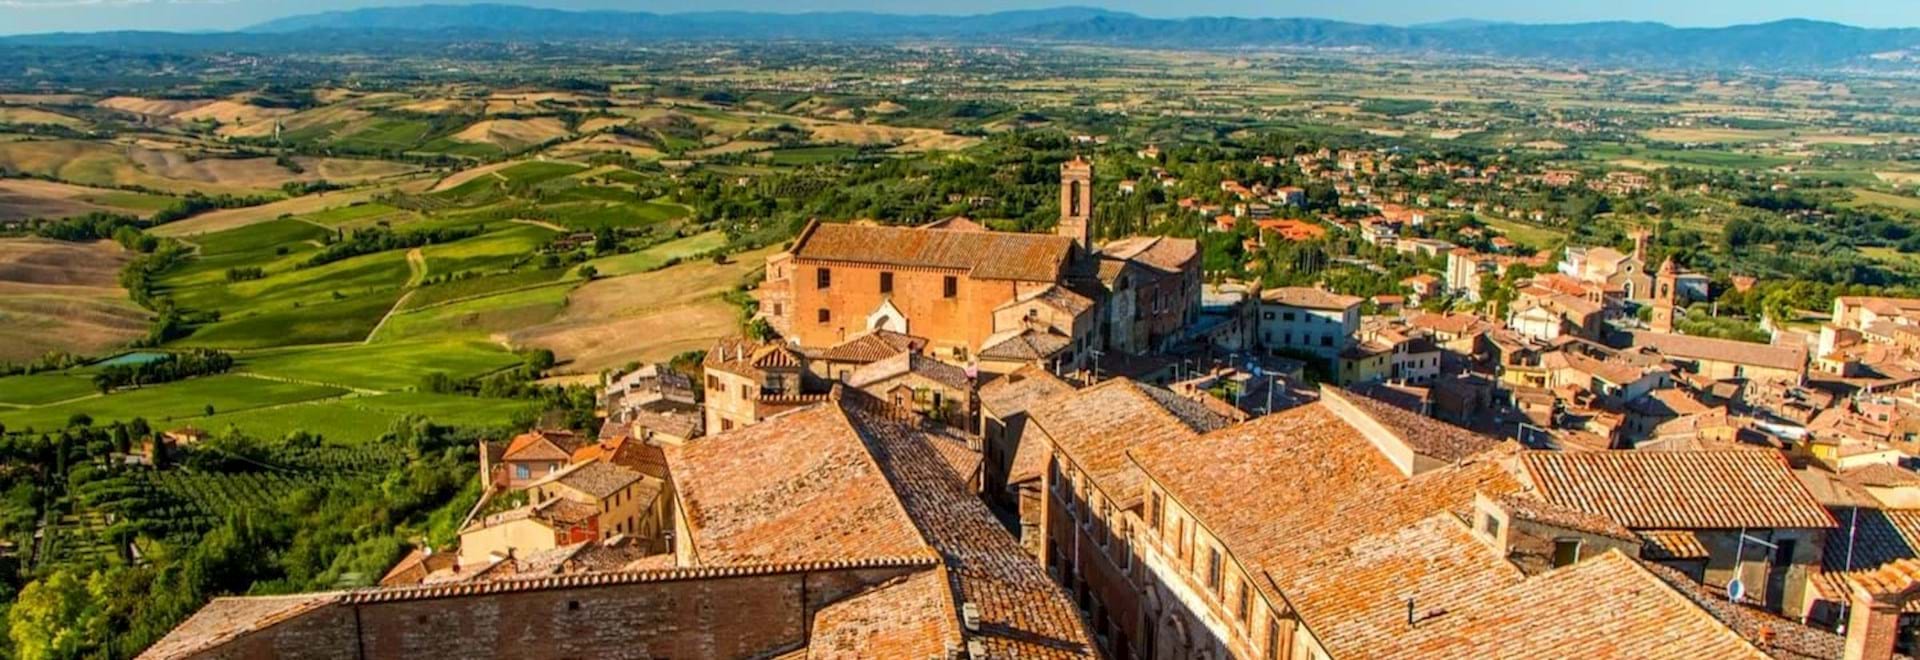 Beautiful view of the roofs in Moltepulciano, Italy